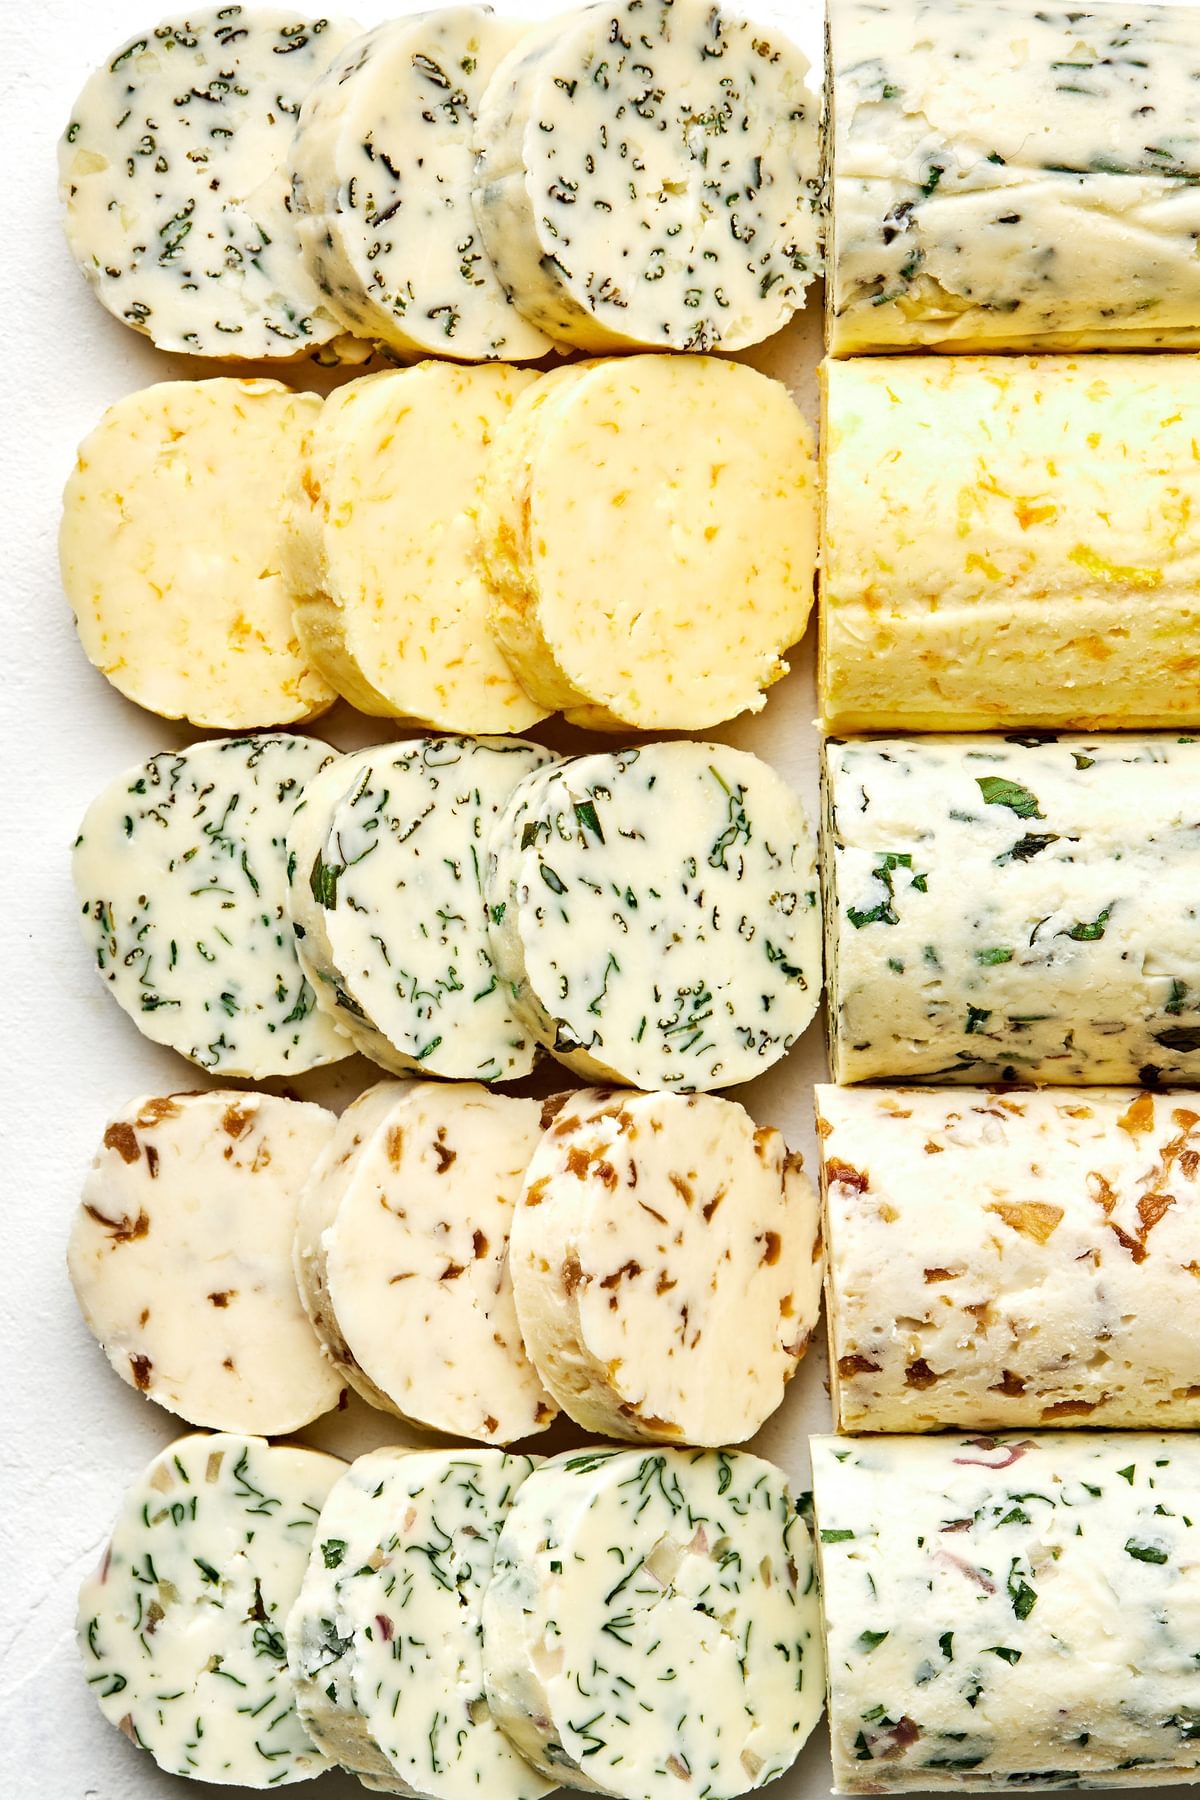 5 sticks of compound butters lined up and sliced made with fresh herbs, citrus zest and juice and caramelized onions